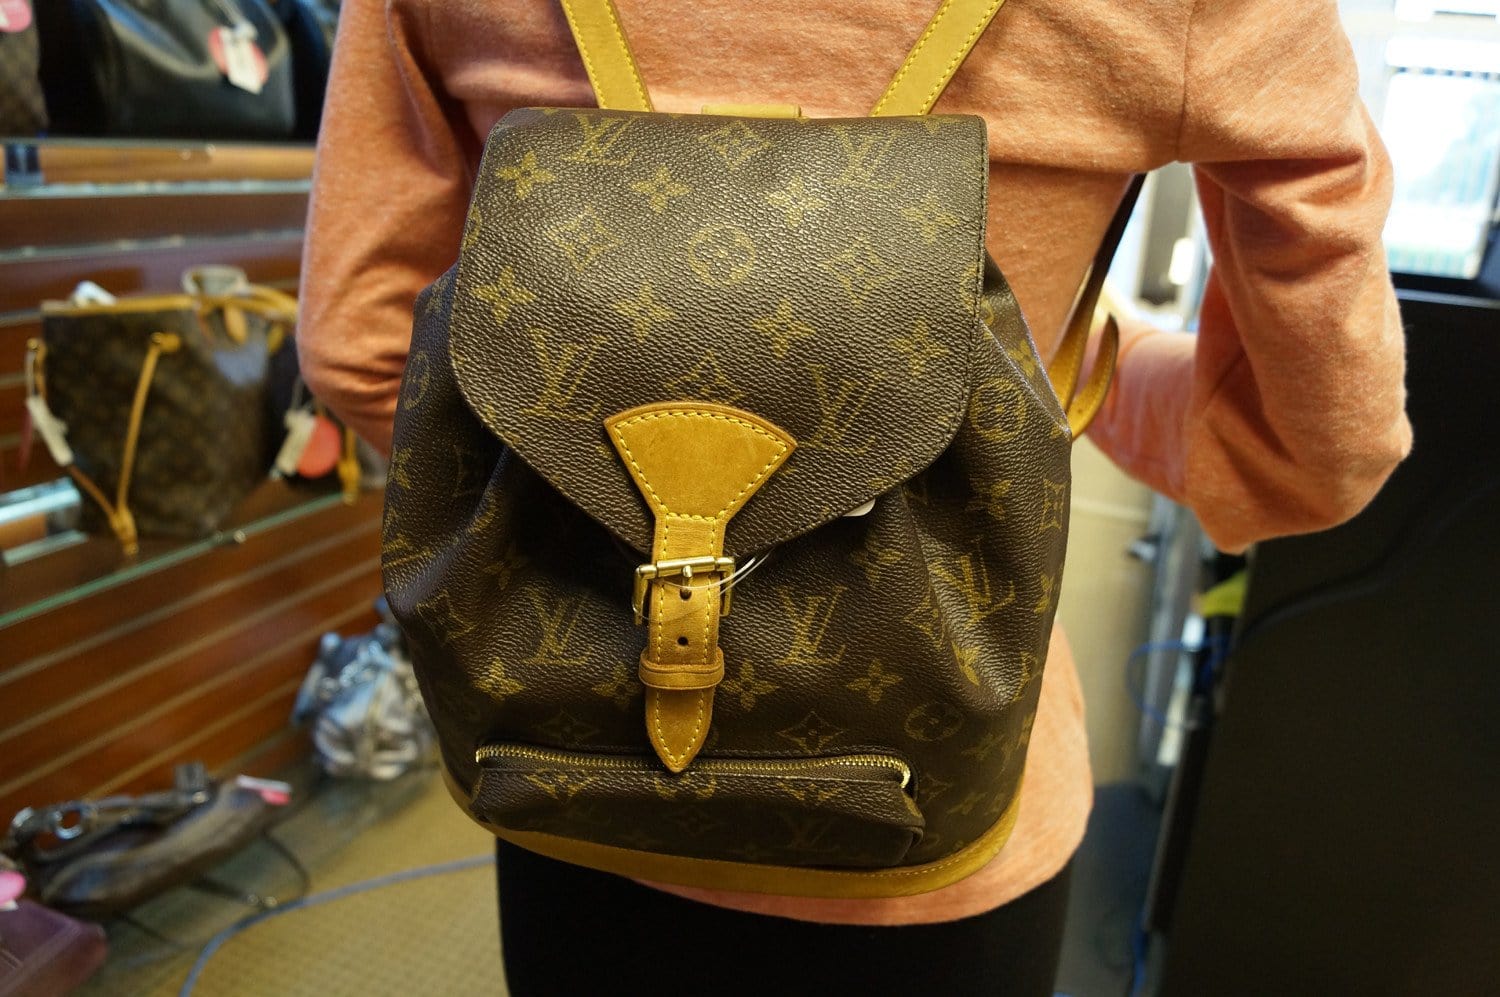 Louis Vuitton, Bags, Sold Lv Backpack Size Mm Used